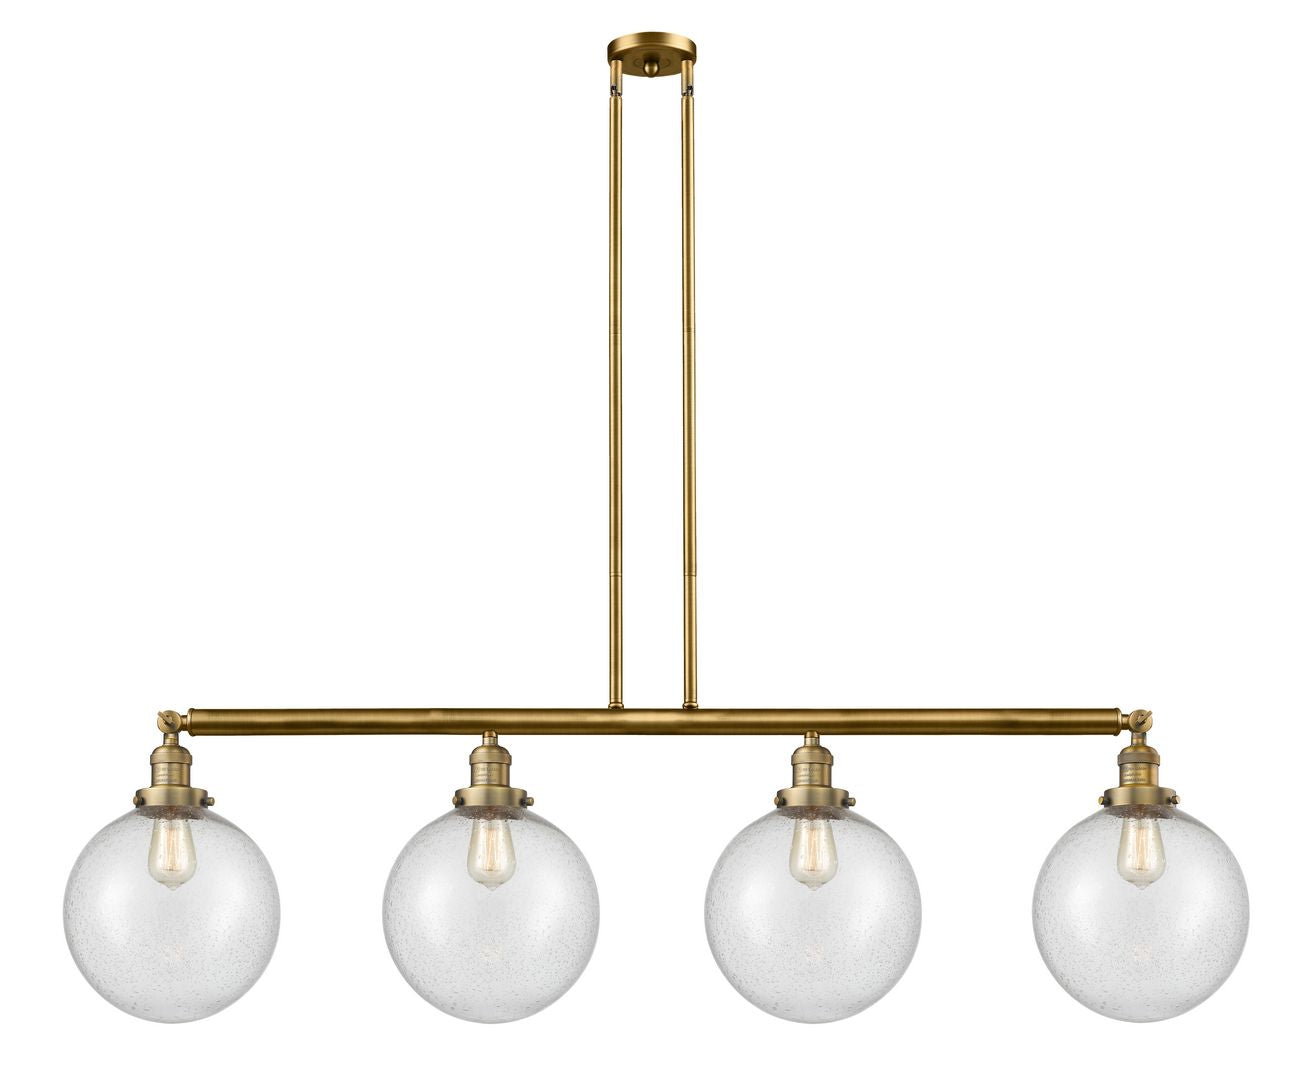 214-BB-G204-10 4-Light 54" Brushed Brass Island Light - Seedy Beacon Glass - LED Bulb - Dimmensions: 54 x 10 x 14<br>Minimum Height : 24<br>Maximum Height : 48 - Sloped Ceiling Compatible: Yes